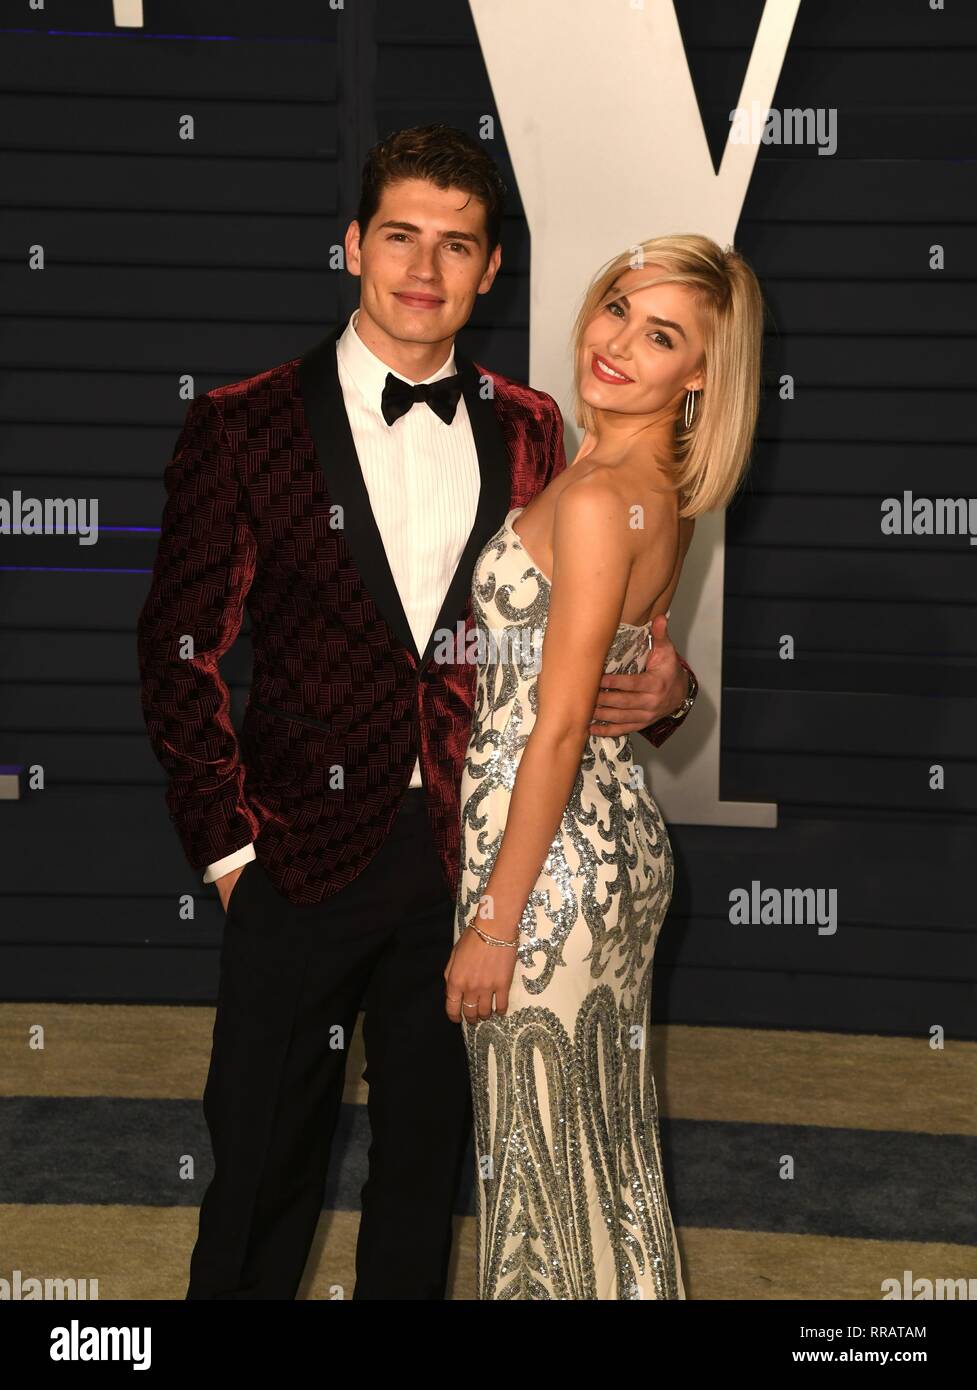 Los Angeles, USA. 24th Feb, 2019. LOS ANGELES, CA - FEBRUARY 24: Gregg Sulkin and Michelle Randolph at the Vanity Fair Oscar Party on February 24, 2019 in Los Angeles, California. Credit: Imagespace/Alamy Live News Stock Photo